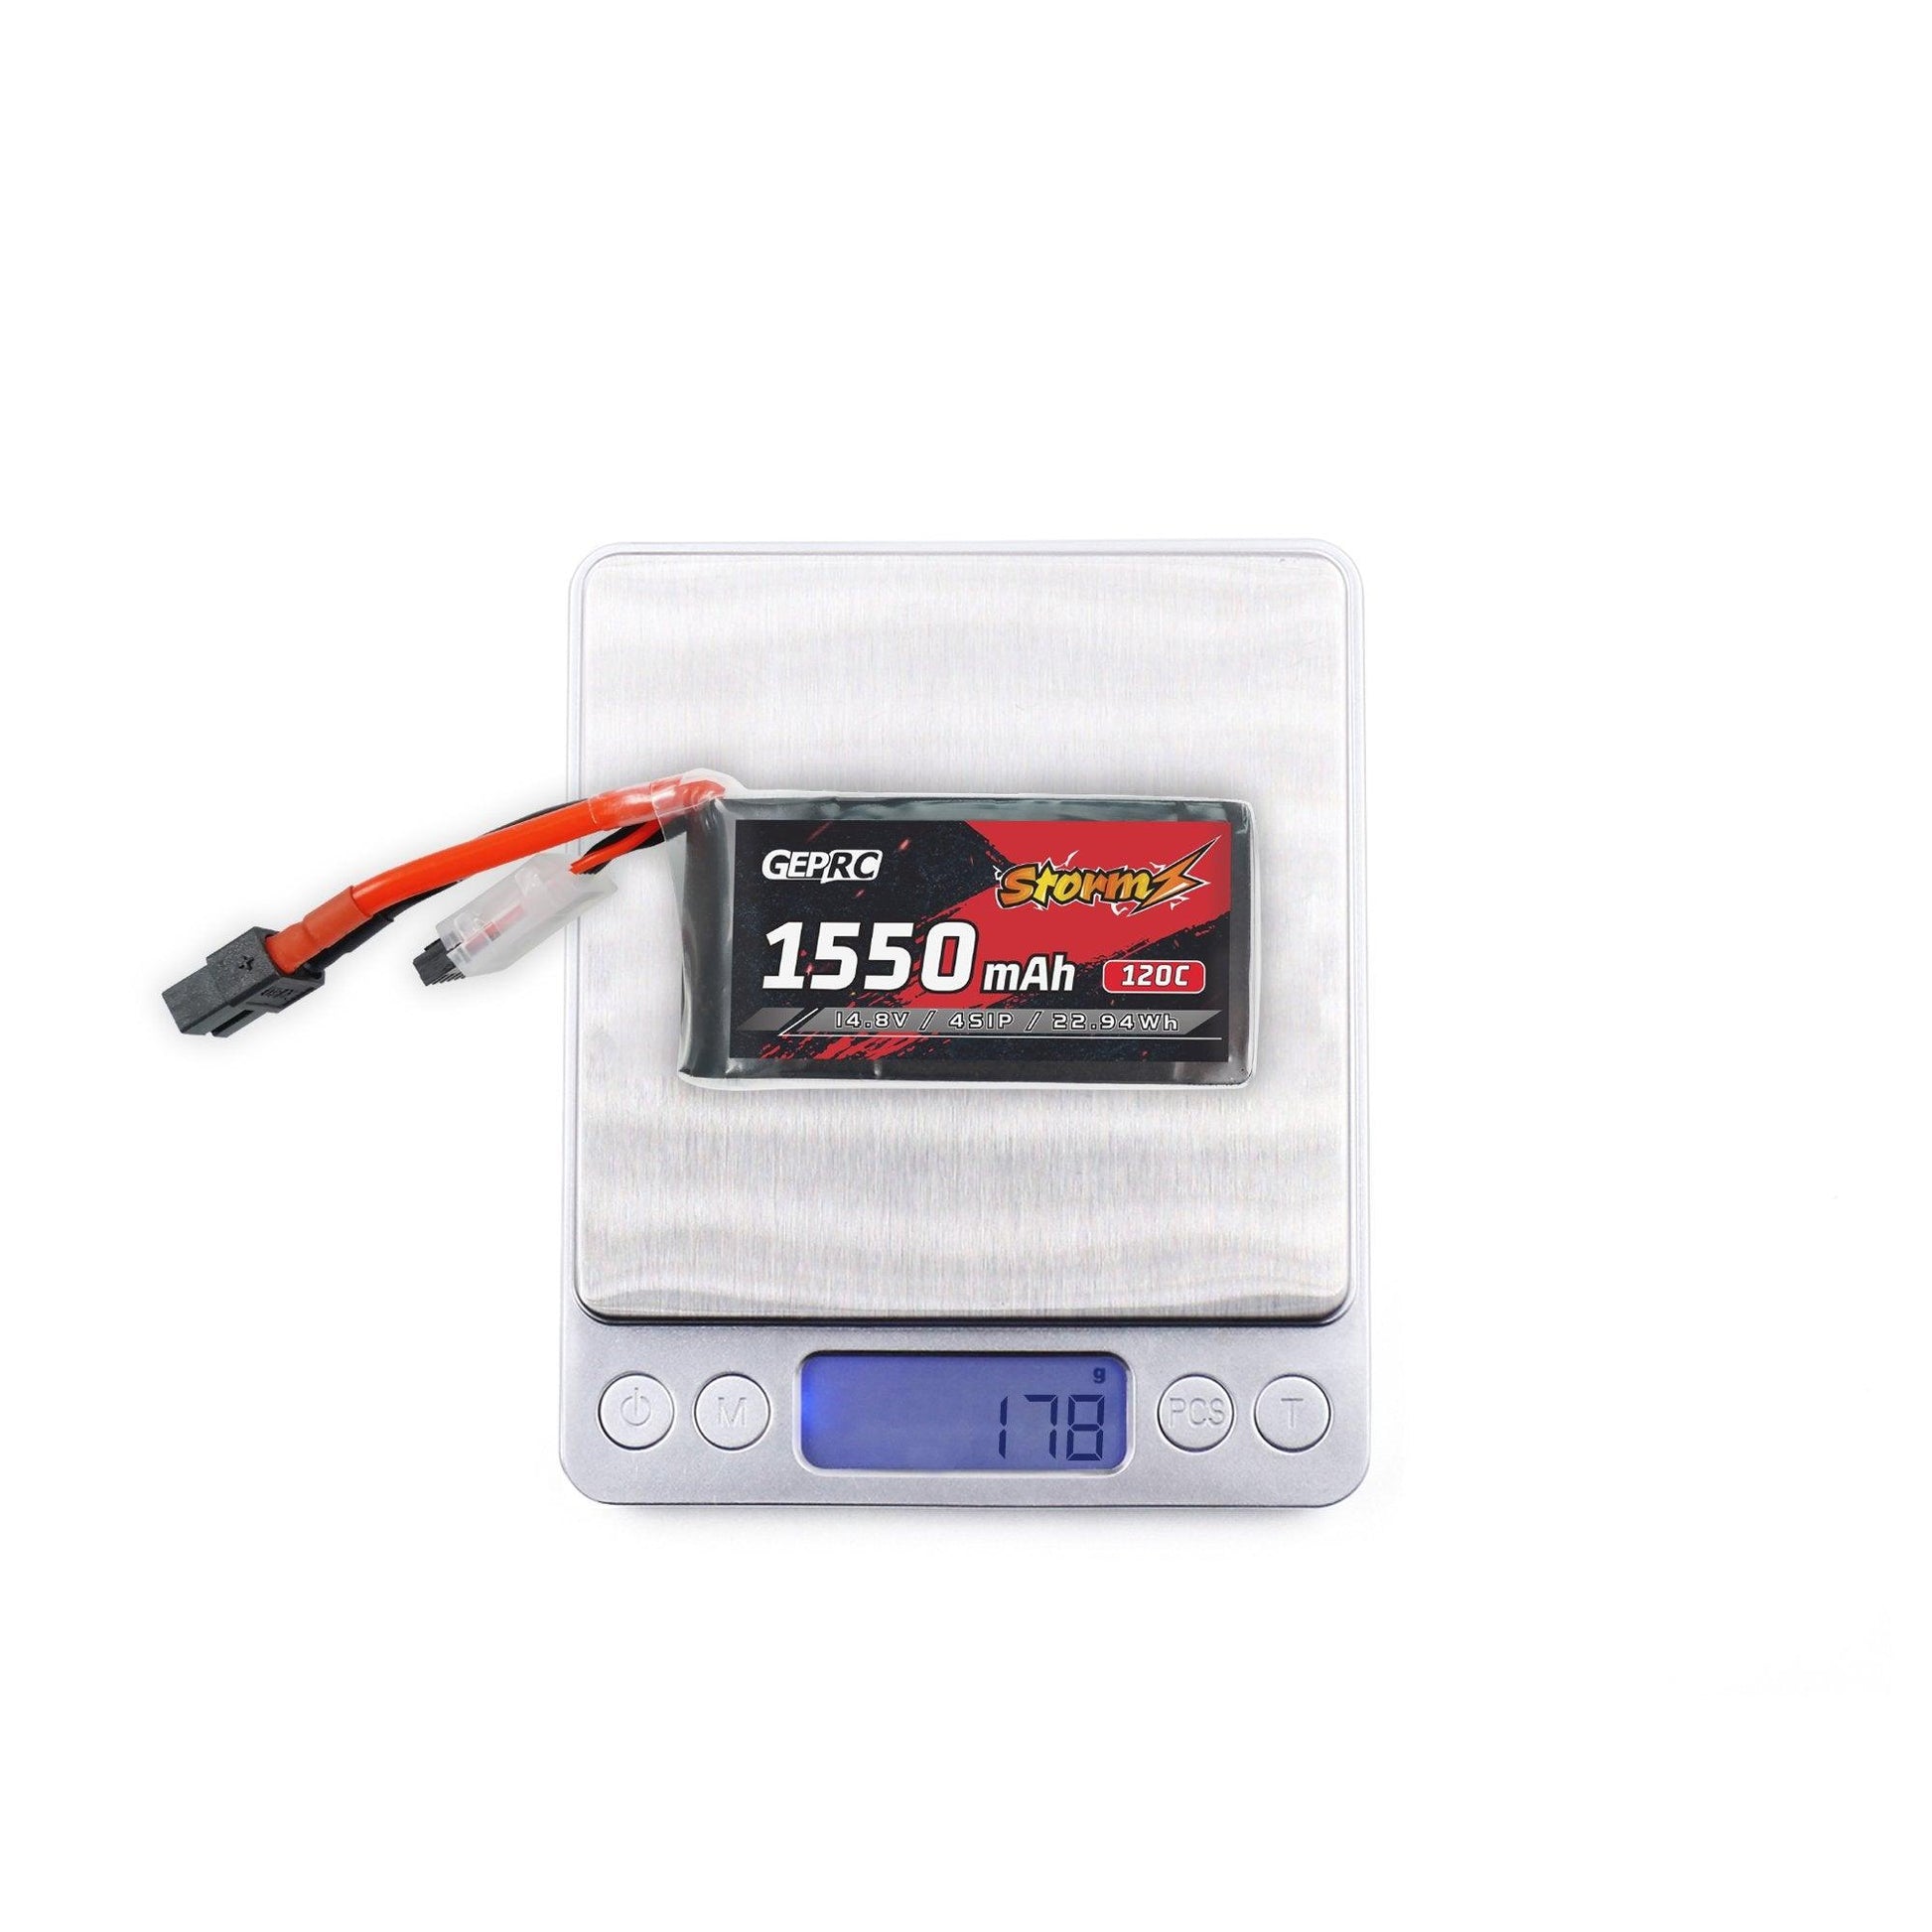 GEPRC Storm 4S 1550mAh 120C Lipo Battery - Suitable For 3-5Inch Series Drone For RC FPV Quadcopter Freestyle Series Drone Parts FPV Battery - RCDrone